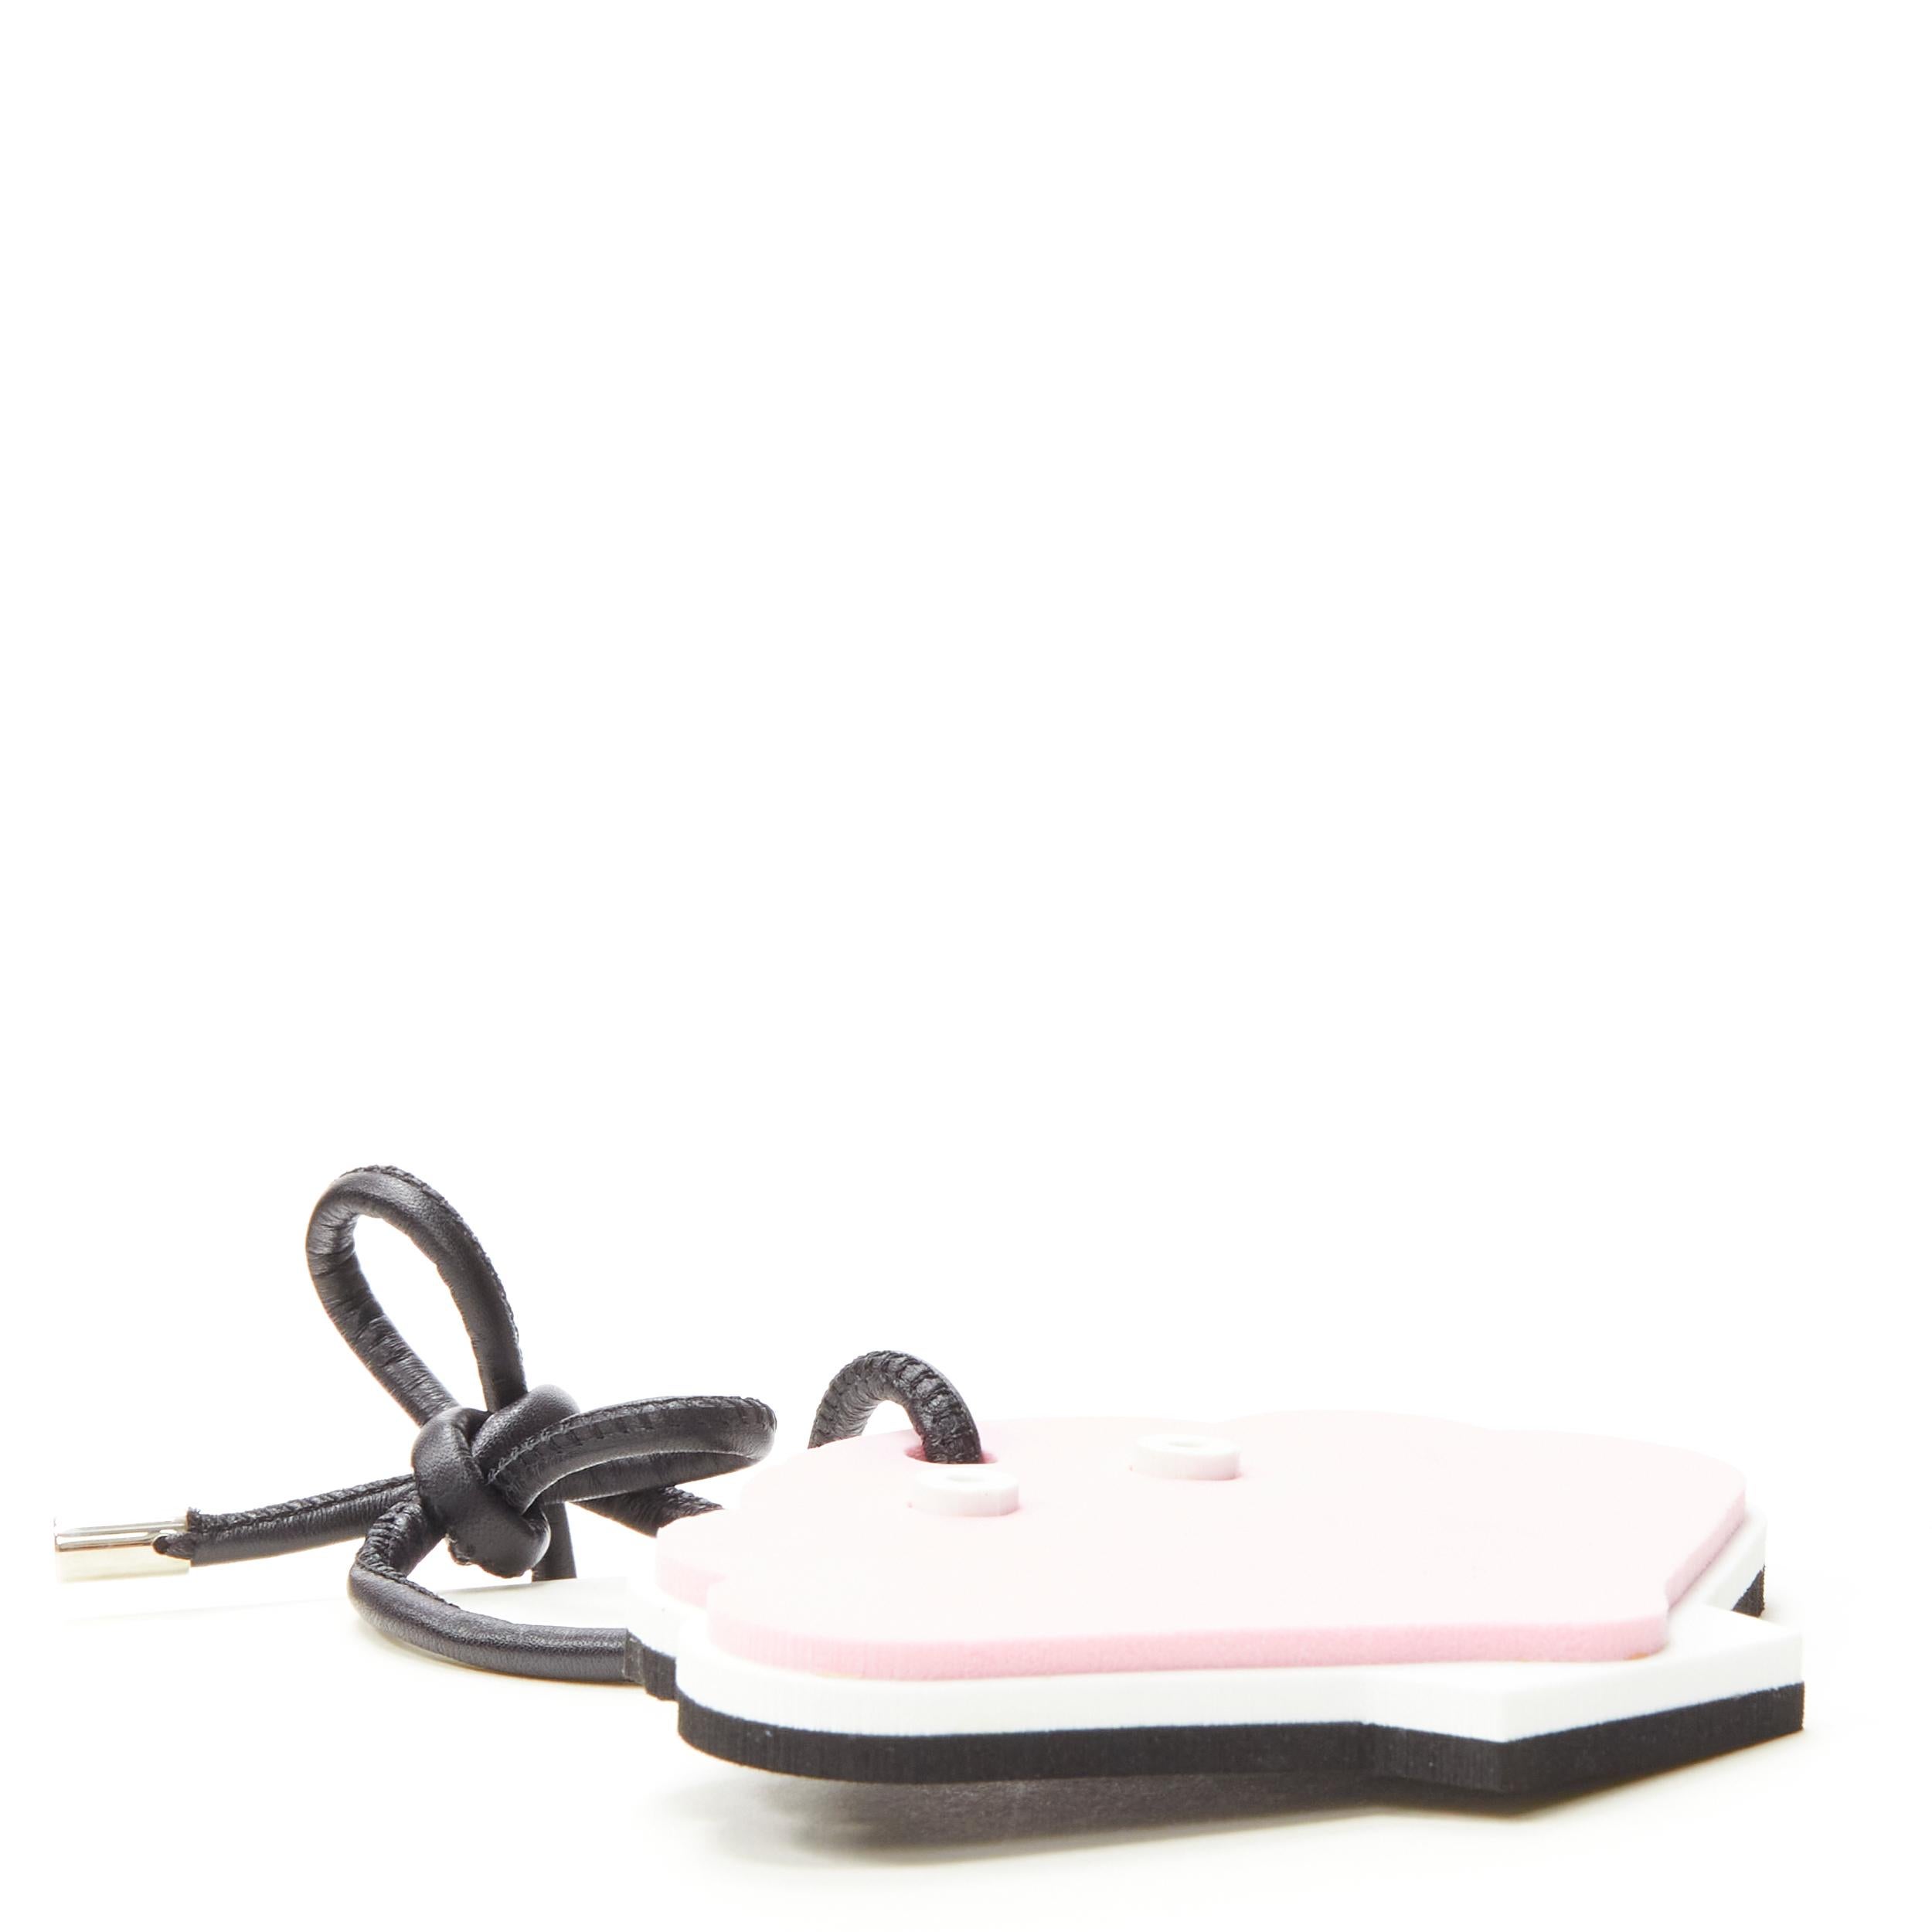 LOEWE pink clam foam black leather cord bag charm In Excellent Condition For Sale In Hong Kong, NT